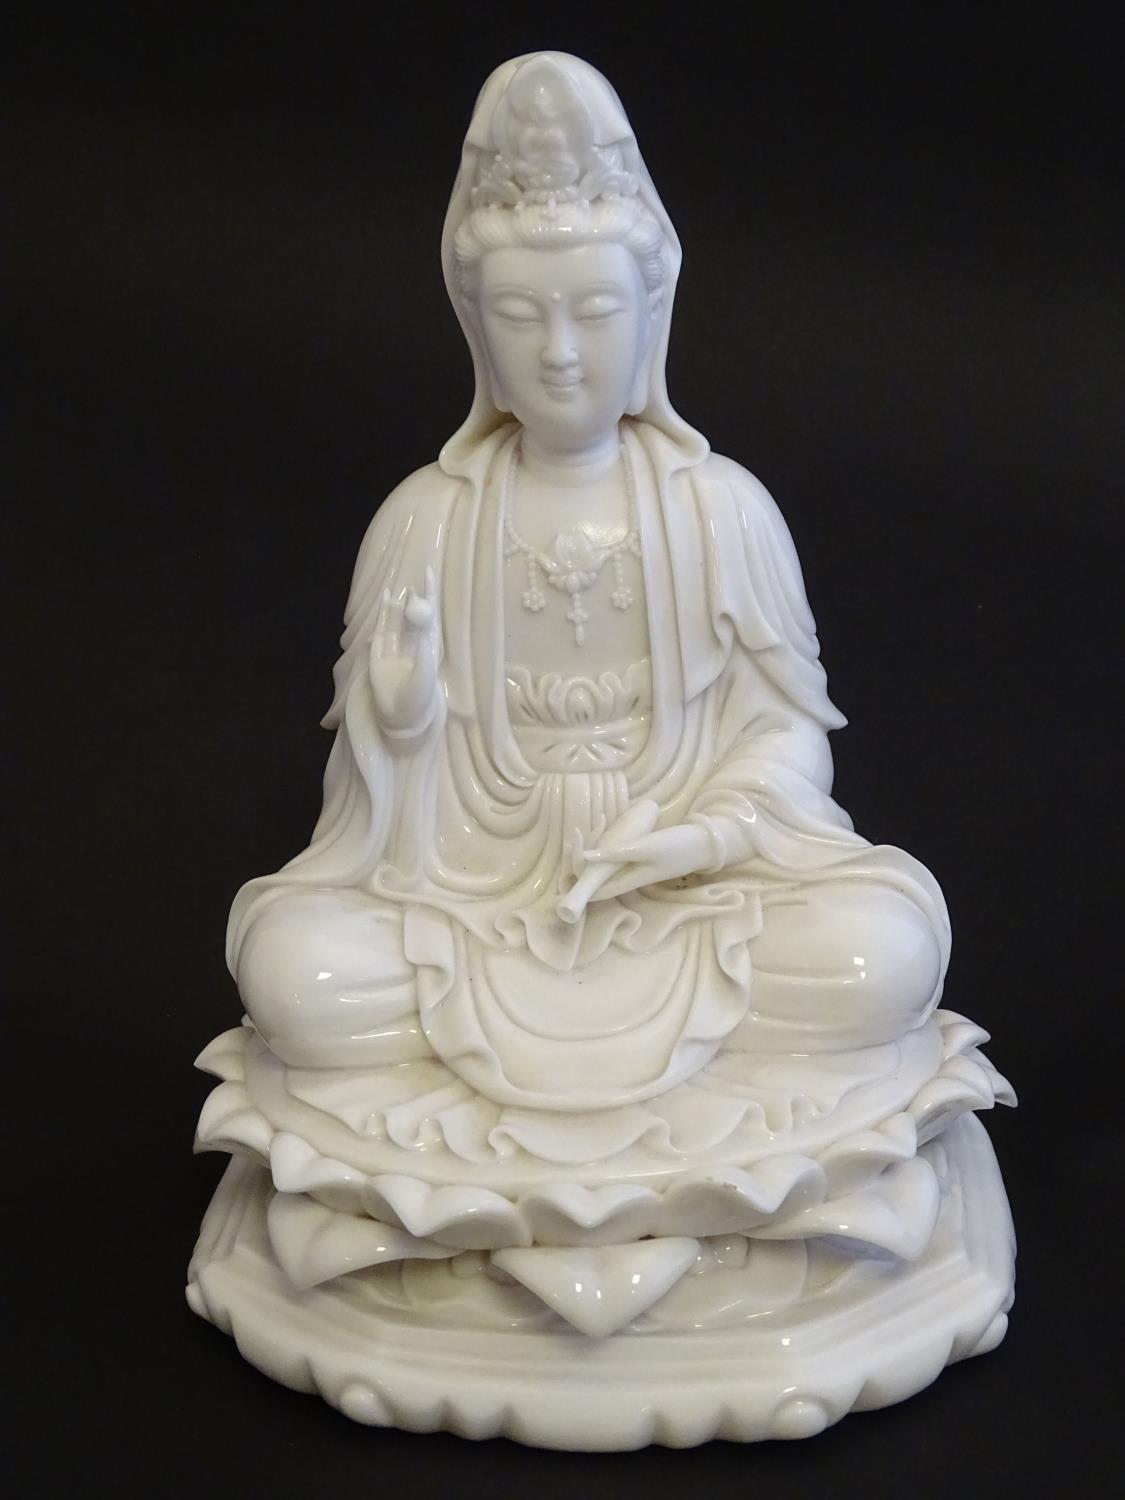 A Chinese blanc de chine figure depicting Guanyin seated on a lotus flower base. Approx. 7 1/2" high